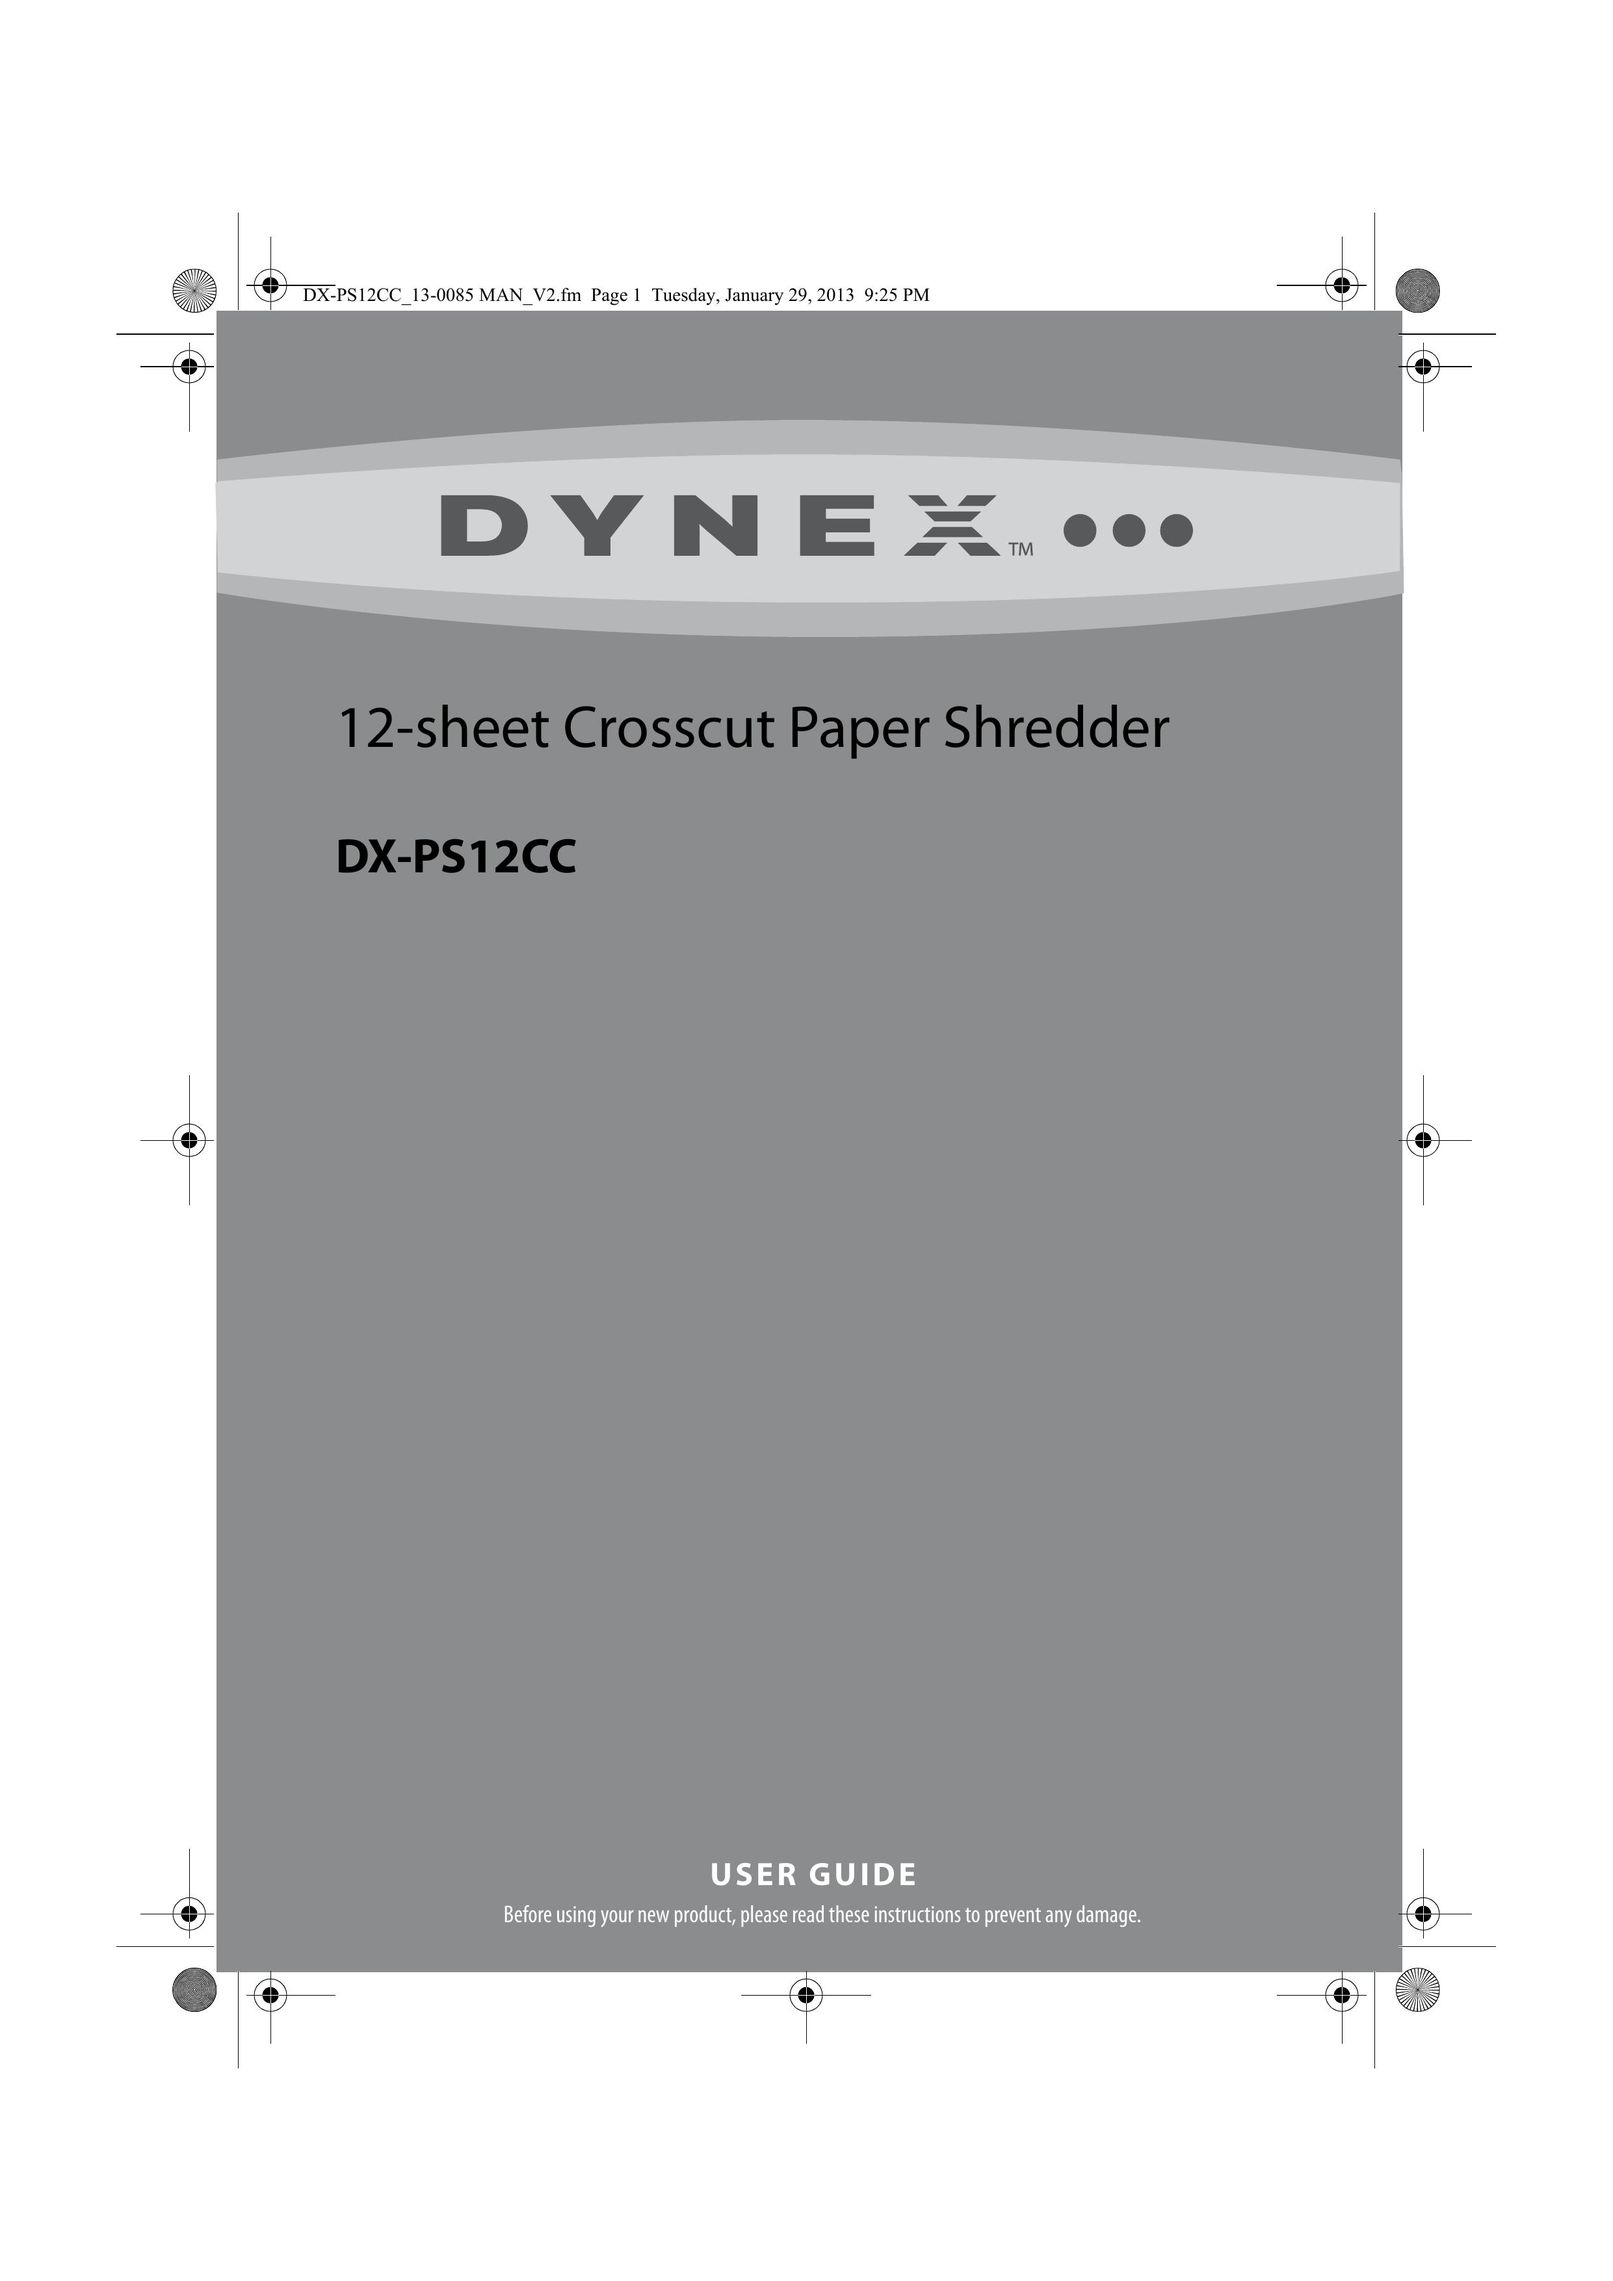 Dynex DX-PS12CC Paper Shredder User Manual (Page 1)